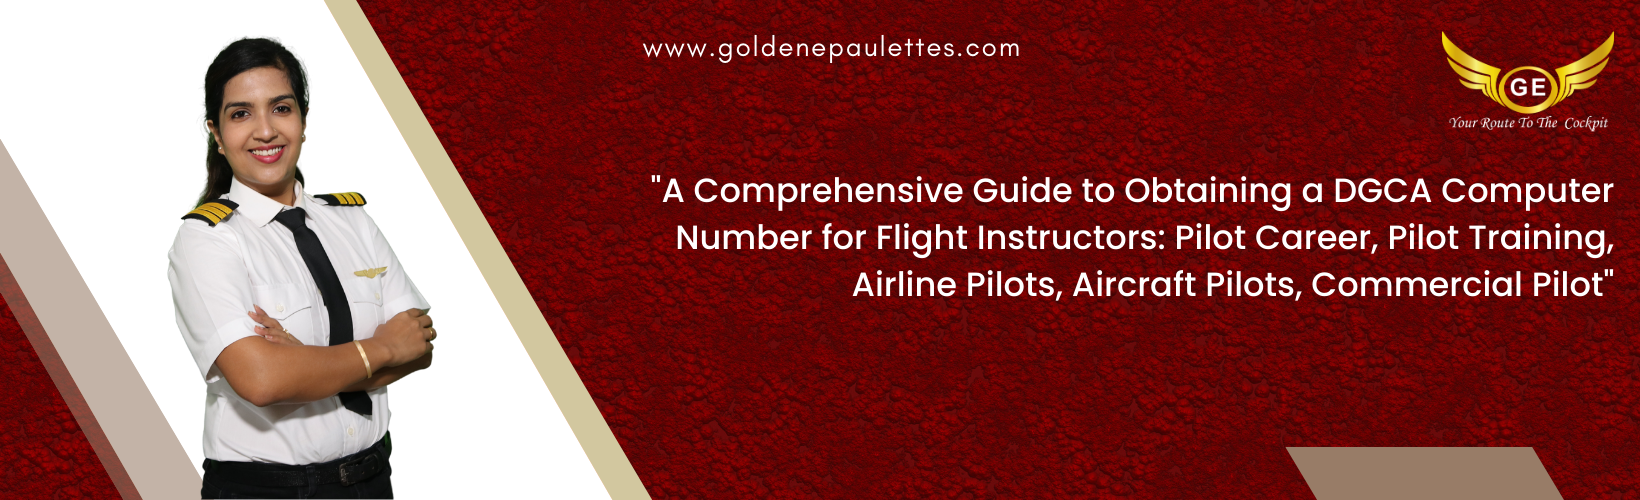 A Quick Guide to Obtaining a DGCA Computer Number for Flight Instructors